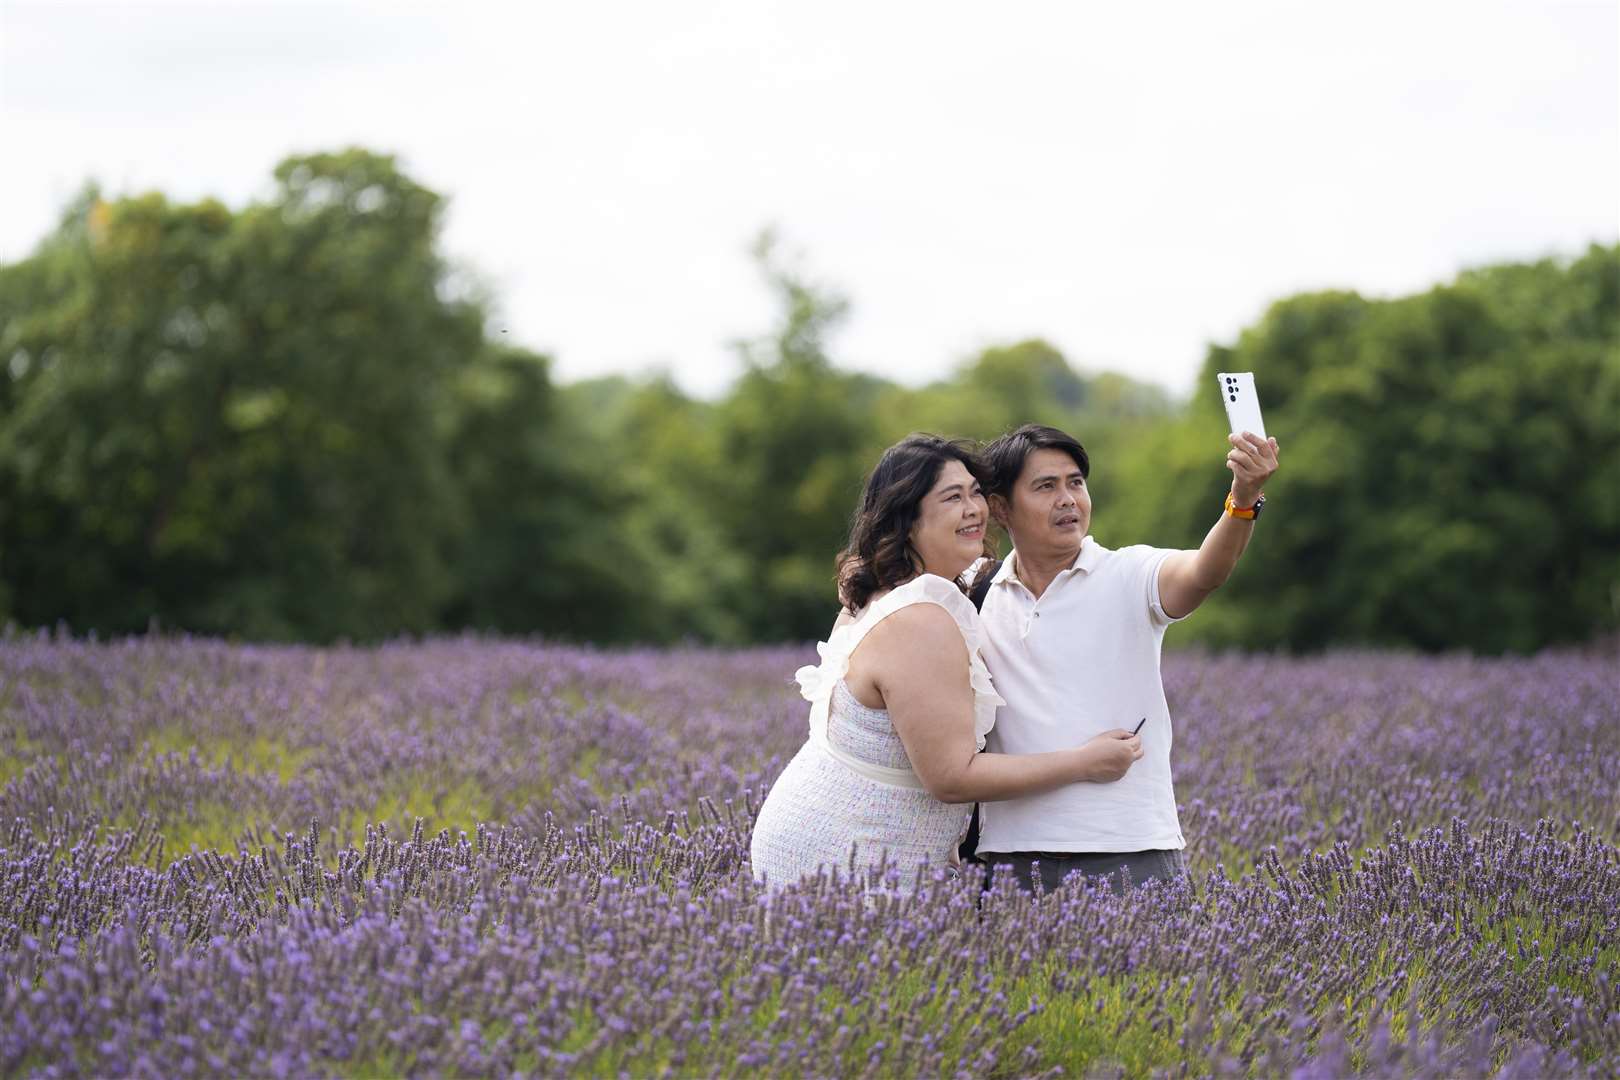 People take photographs in the lavender at Mayfield Lavender Farm in Sutton (Kirsty O’Connor/PA)